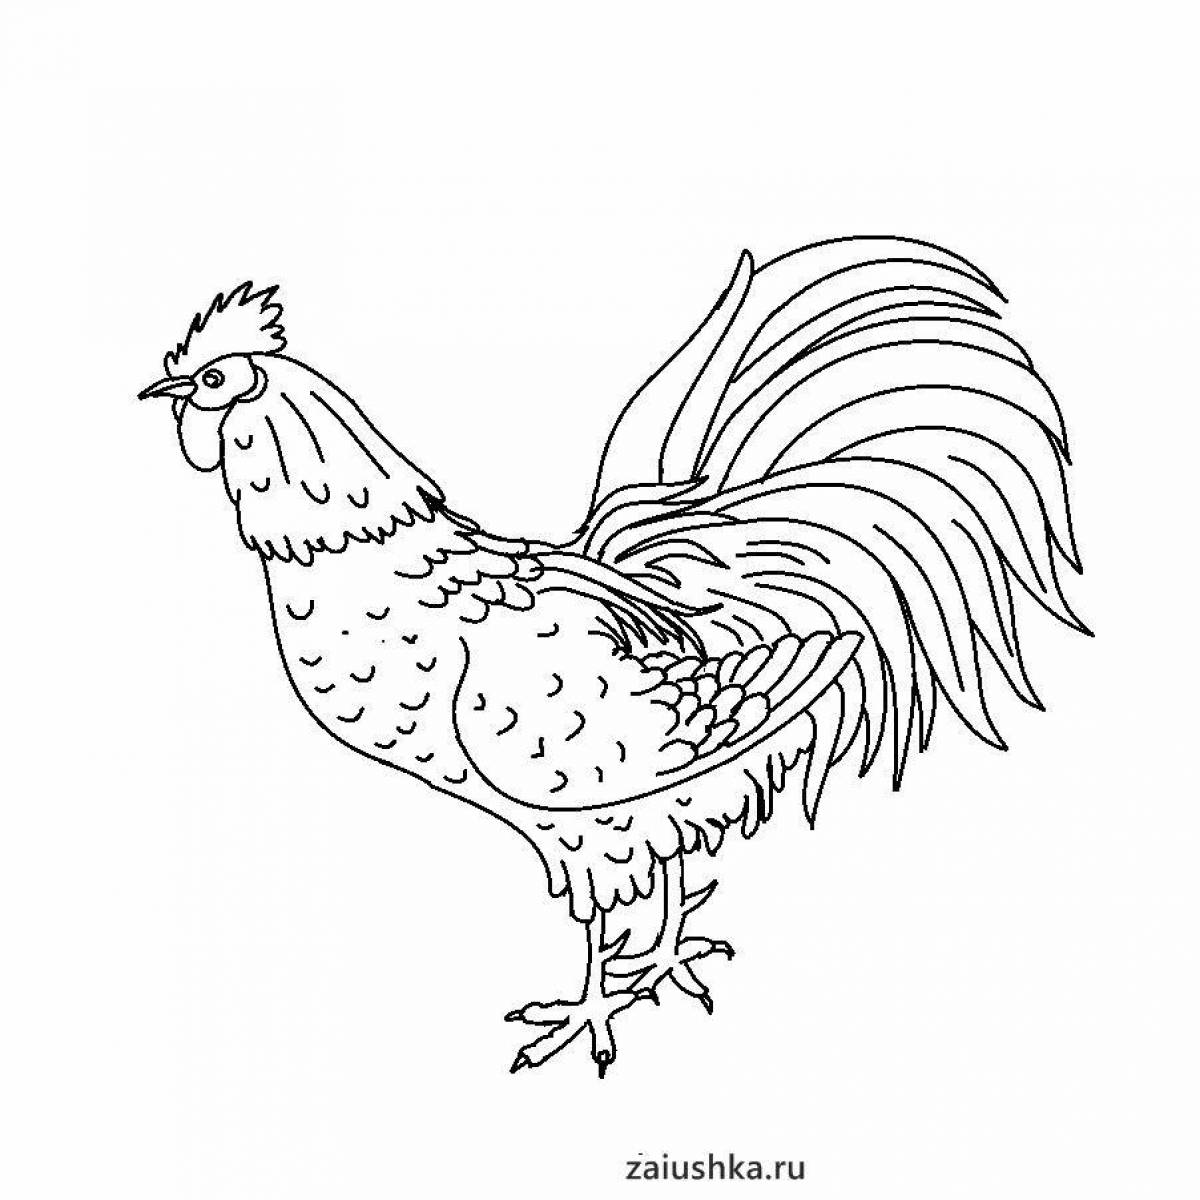 Coloring book of a gorgeously colored rooster